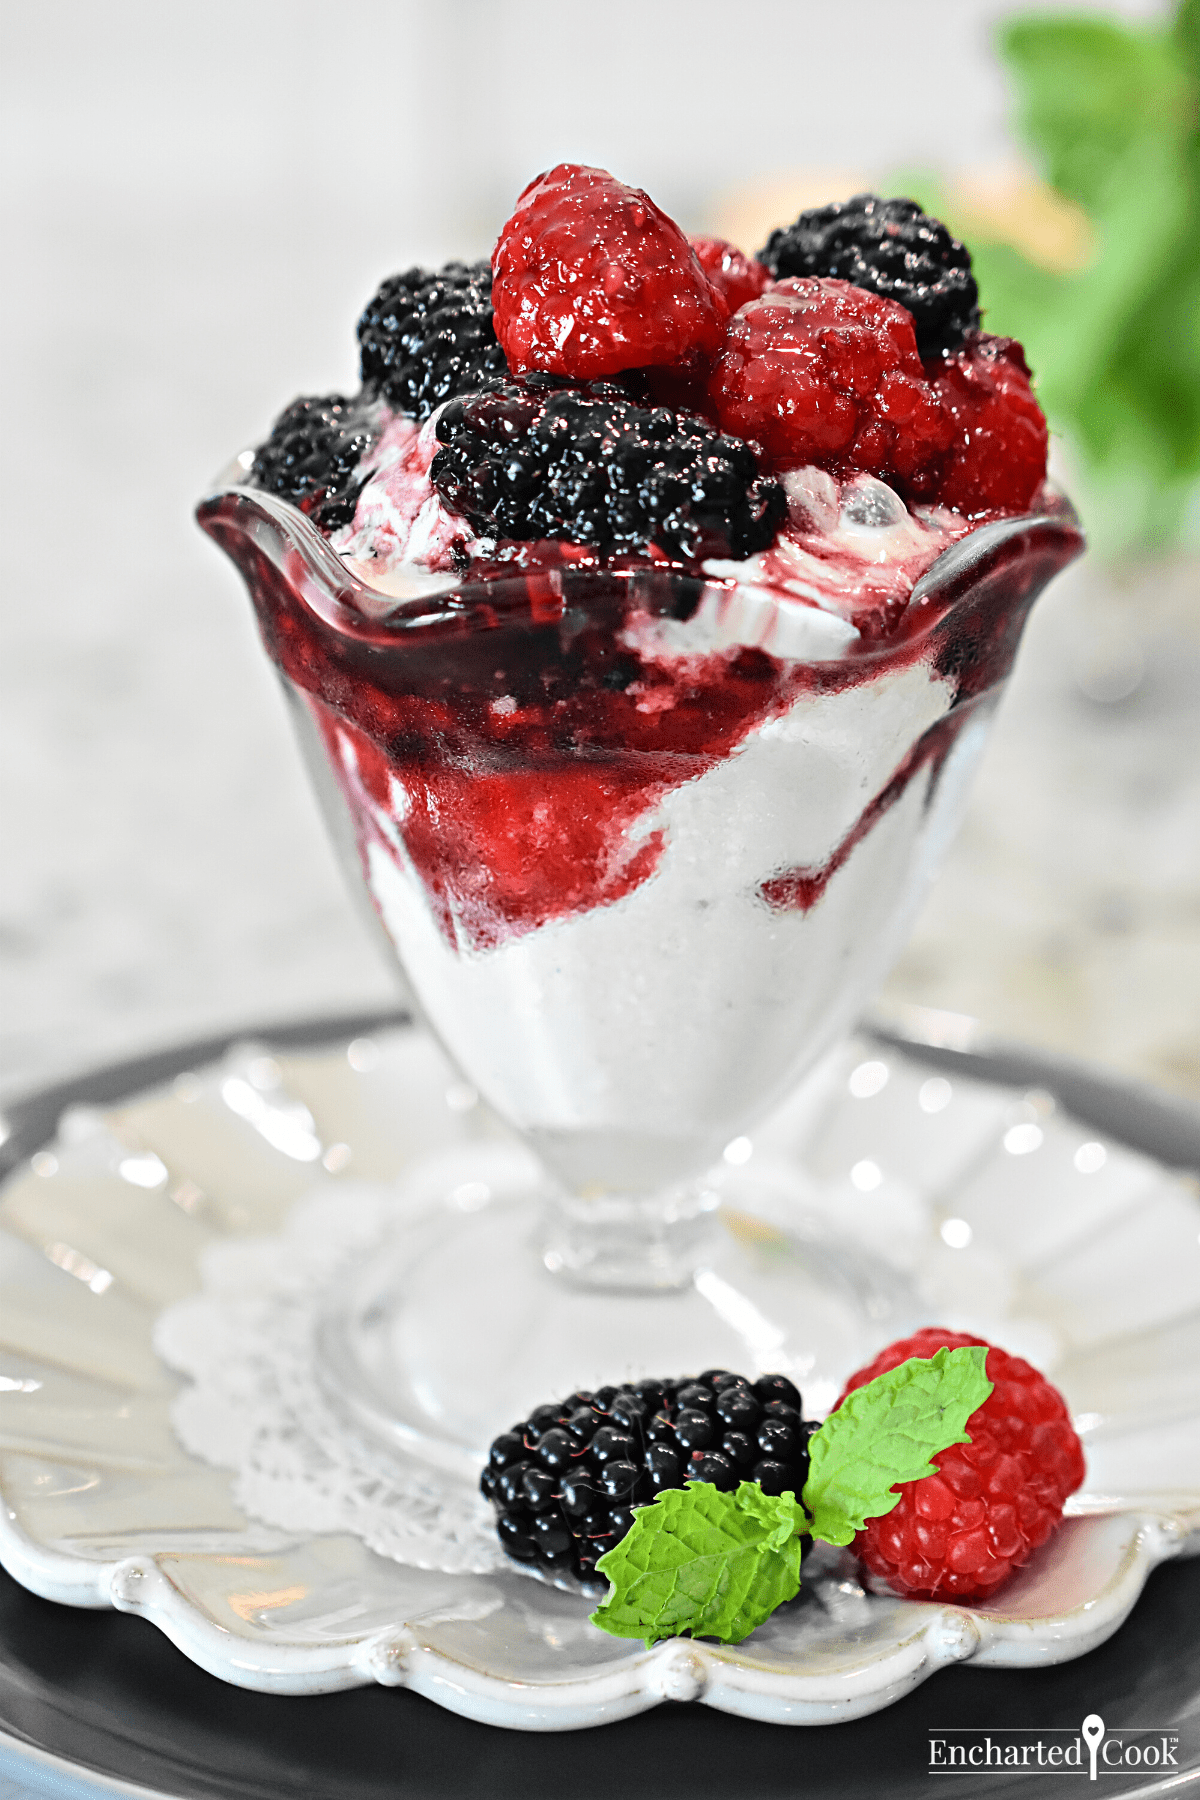 Berries and a deep red sauce over vanilla ice cream.